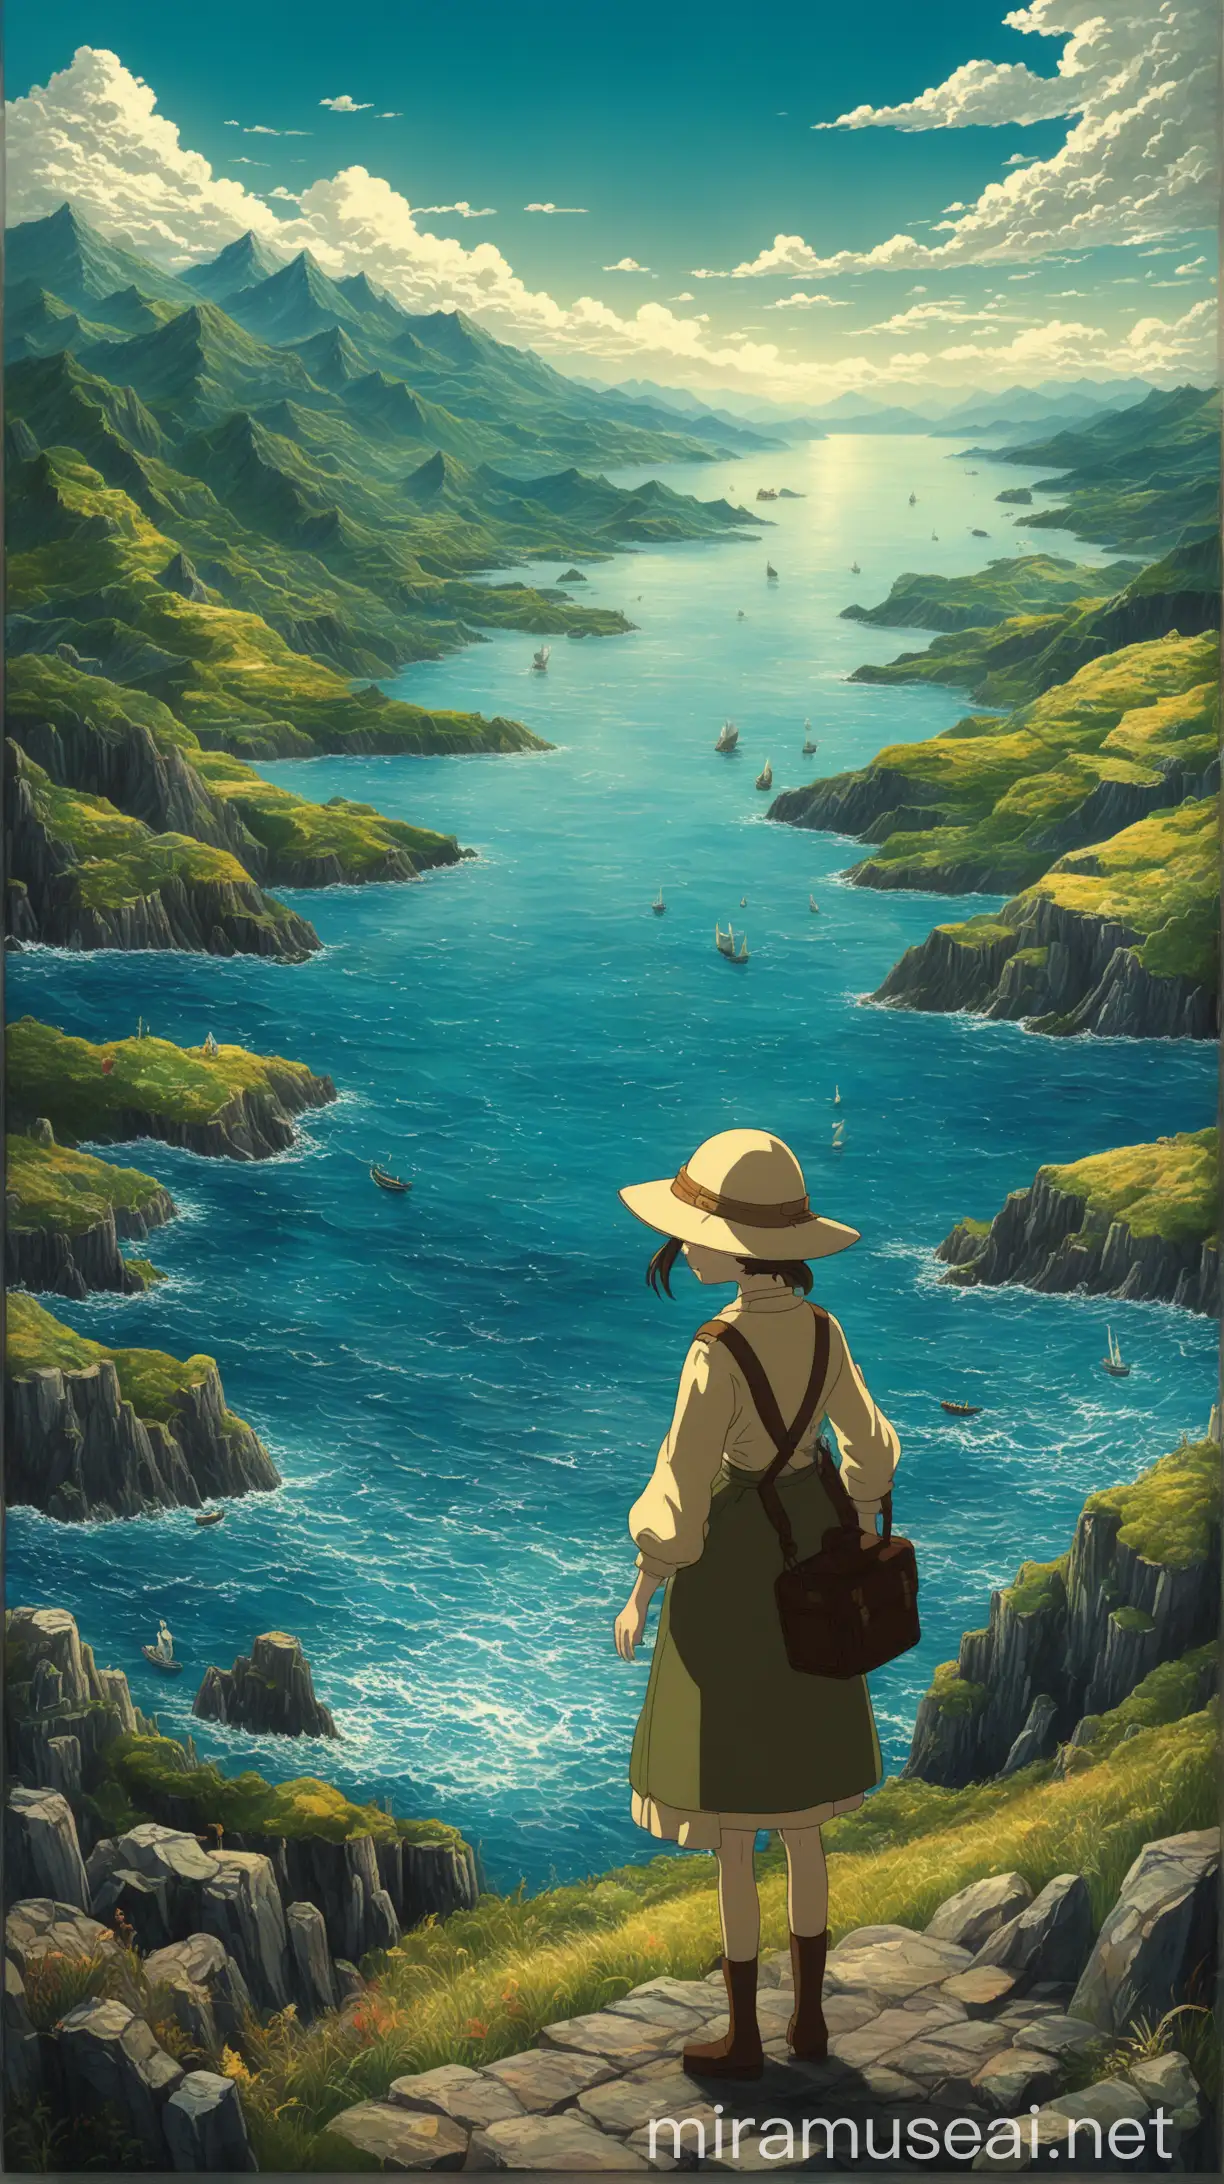 Adventurous Anime Girl Travels Amongst Majestic Ocean and Mountain Landscapes